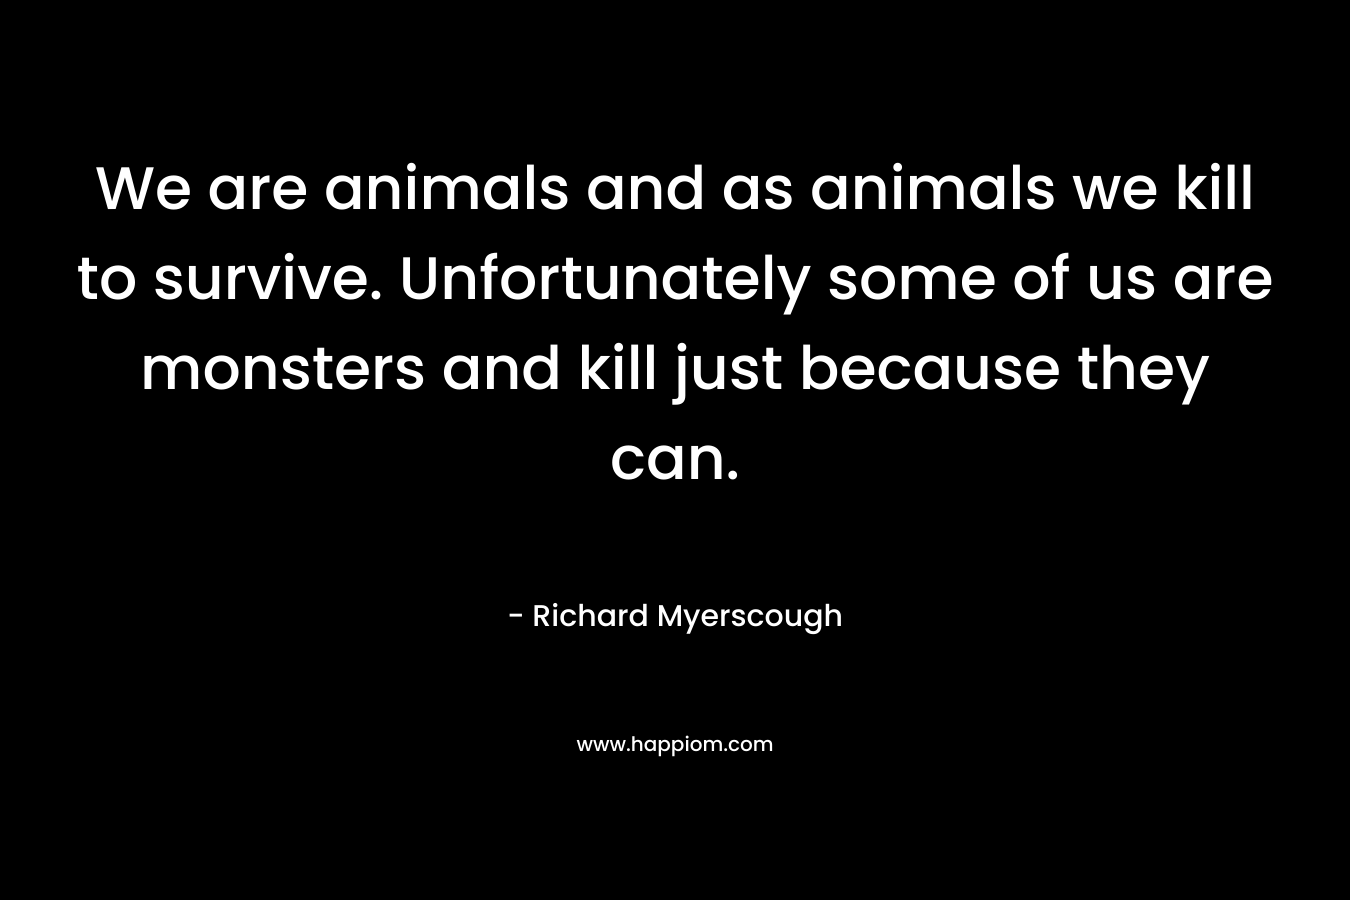 We are animals and as animals we kill to survive. Unfortunately some of us are monsters and kill just because they can.